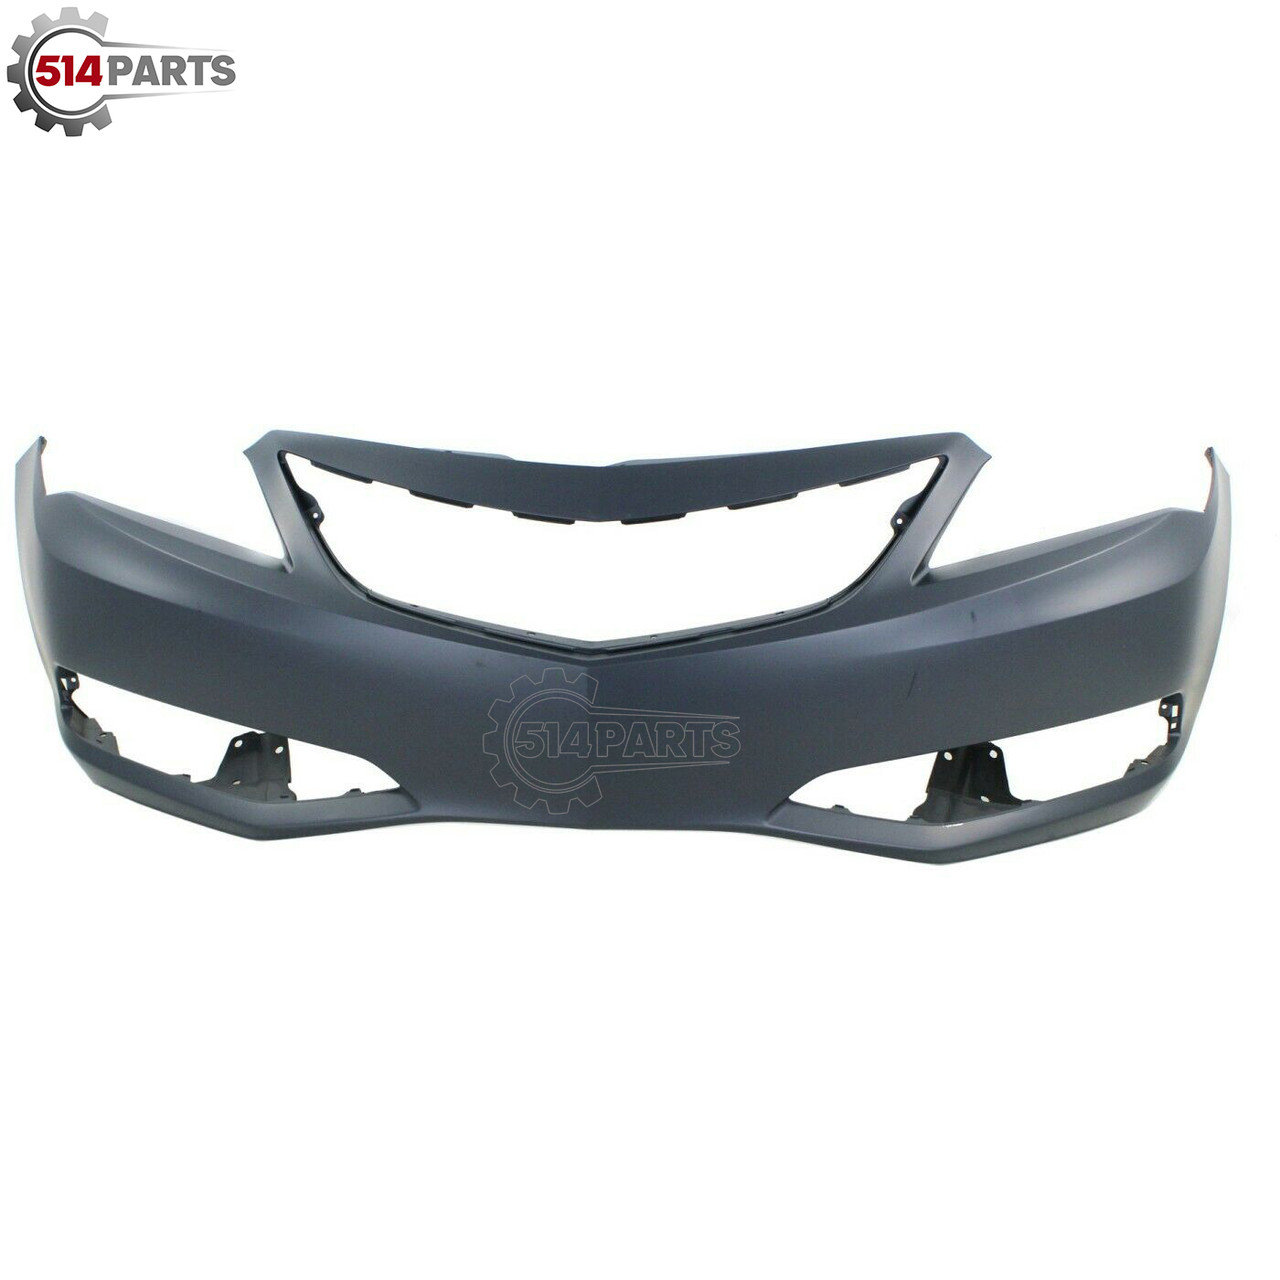 2013 - 2015 ACURA ILX and ILX HYBRID FRONT BUMPER COVER - PARE-CHOC AVANT